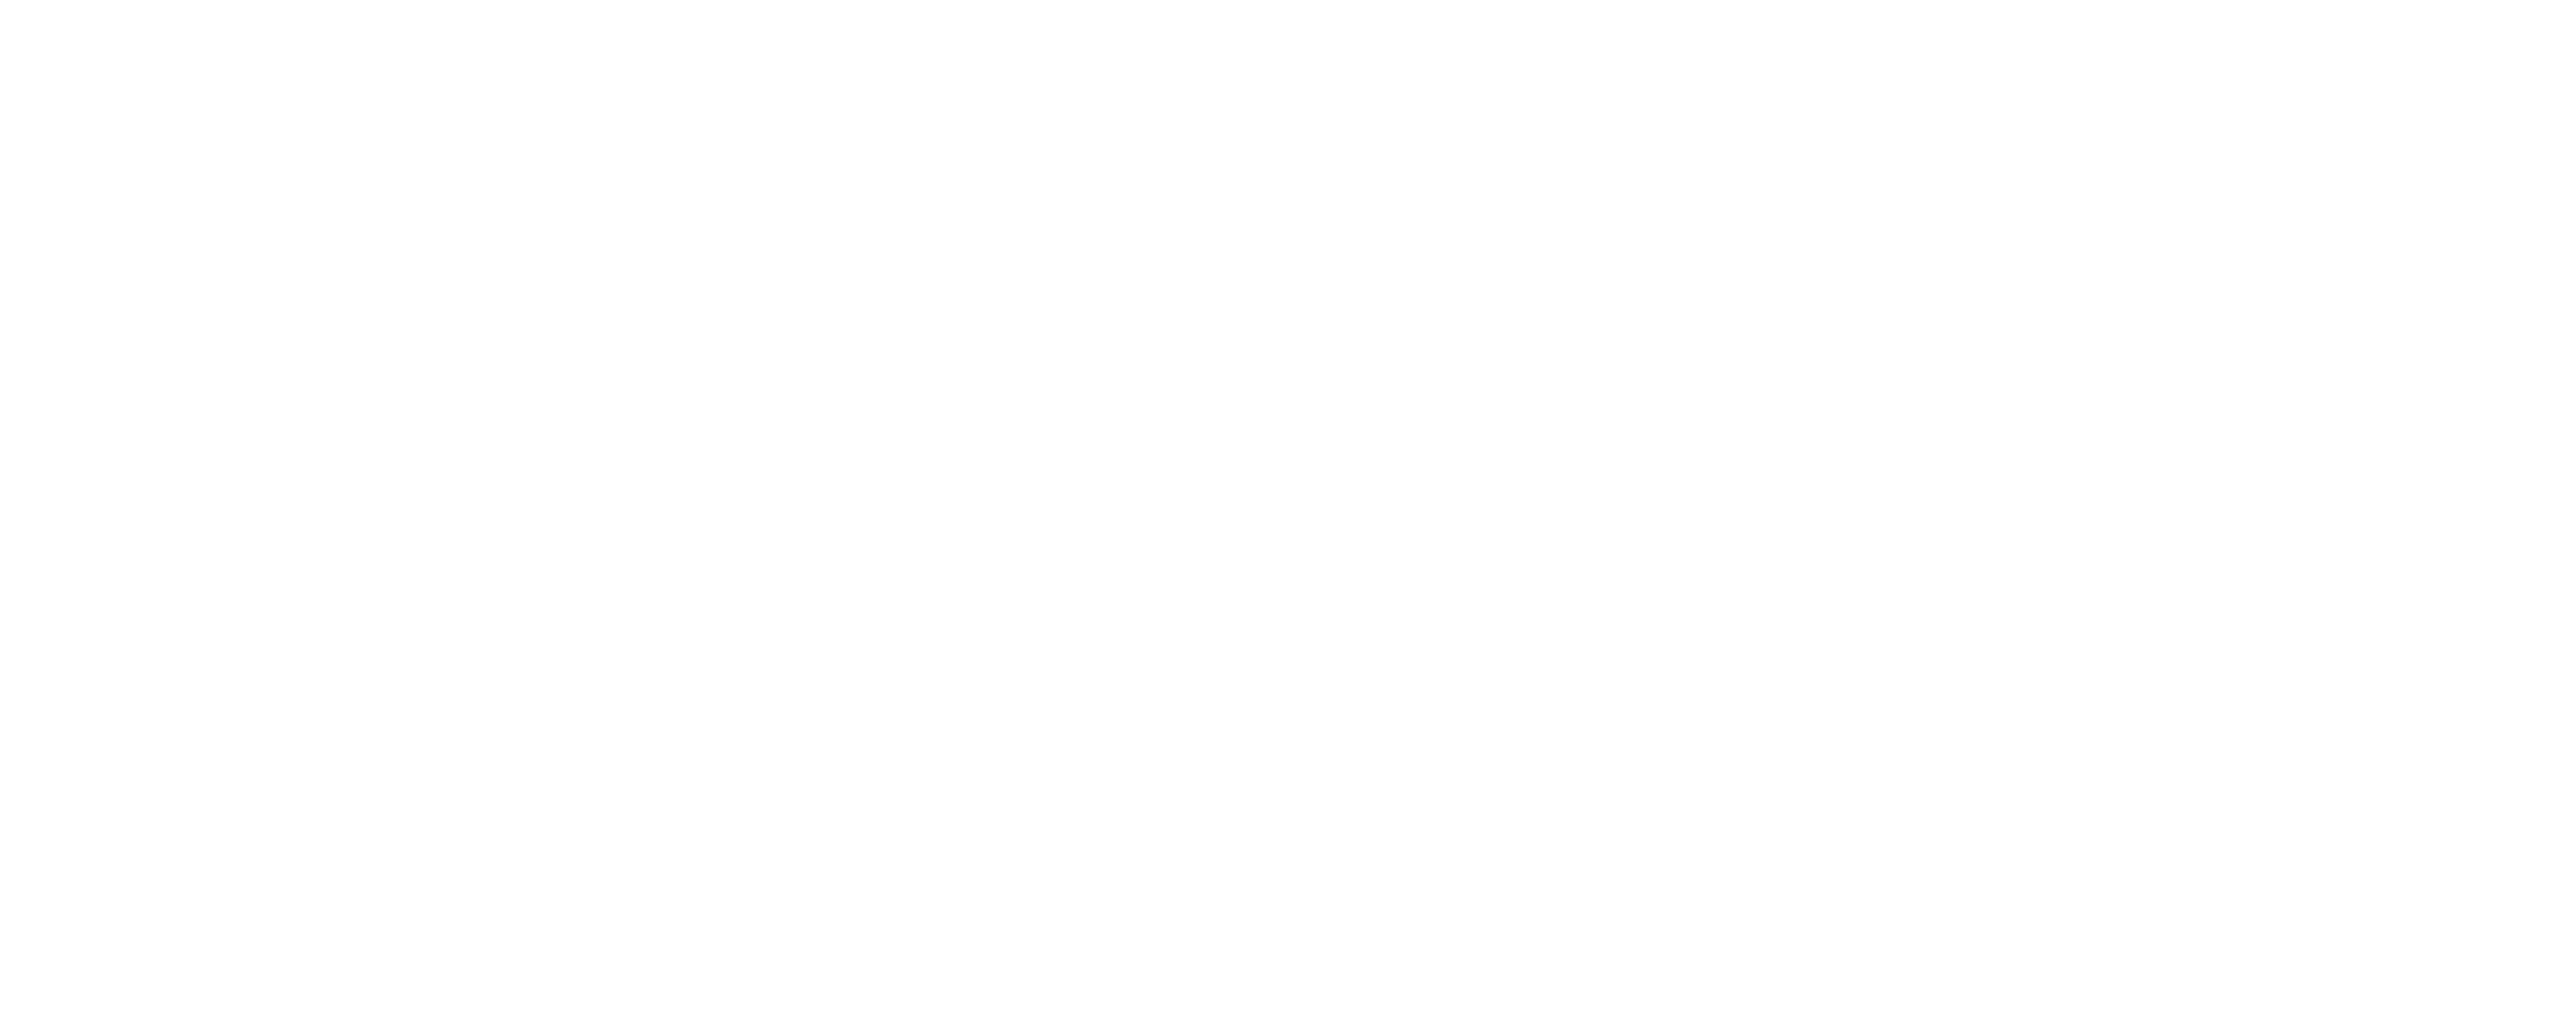 James Investment Group